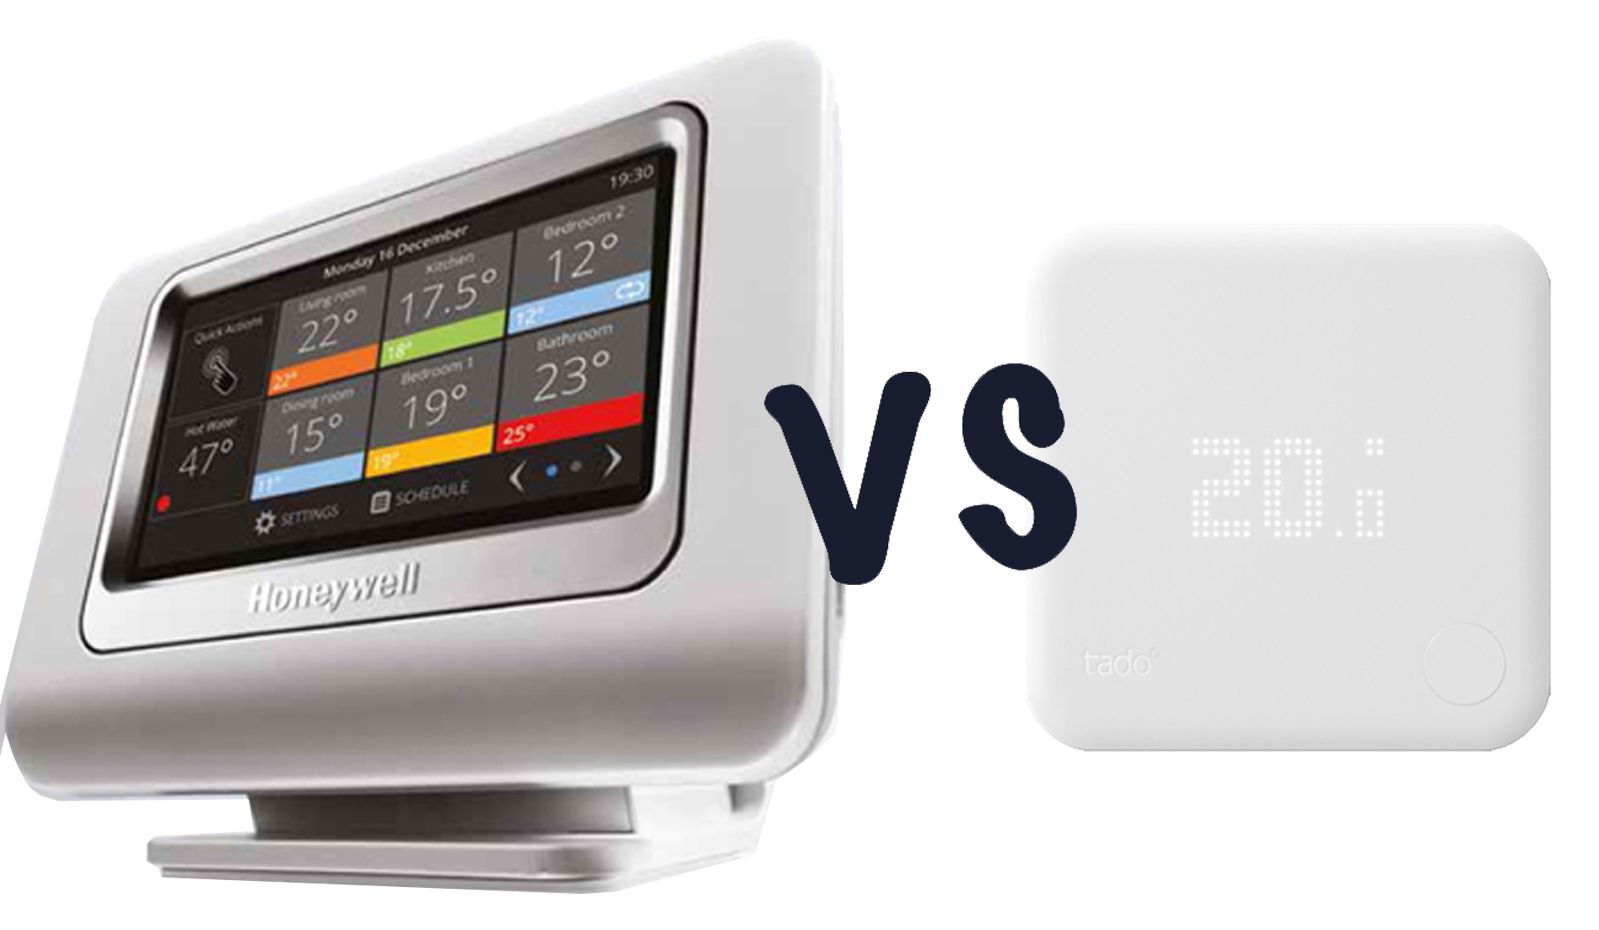 honeywell evohome vs tado 2 0 what’s the difference  image 1